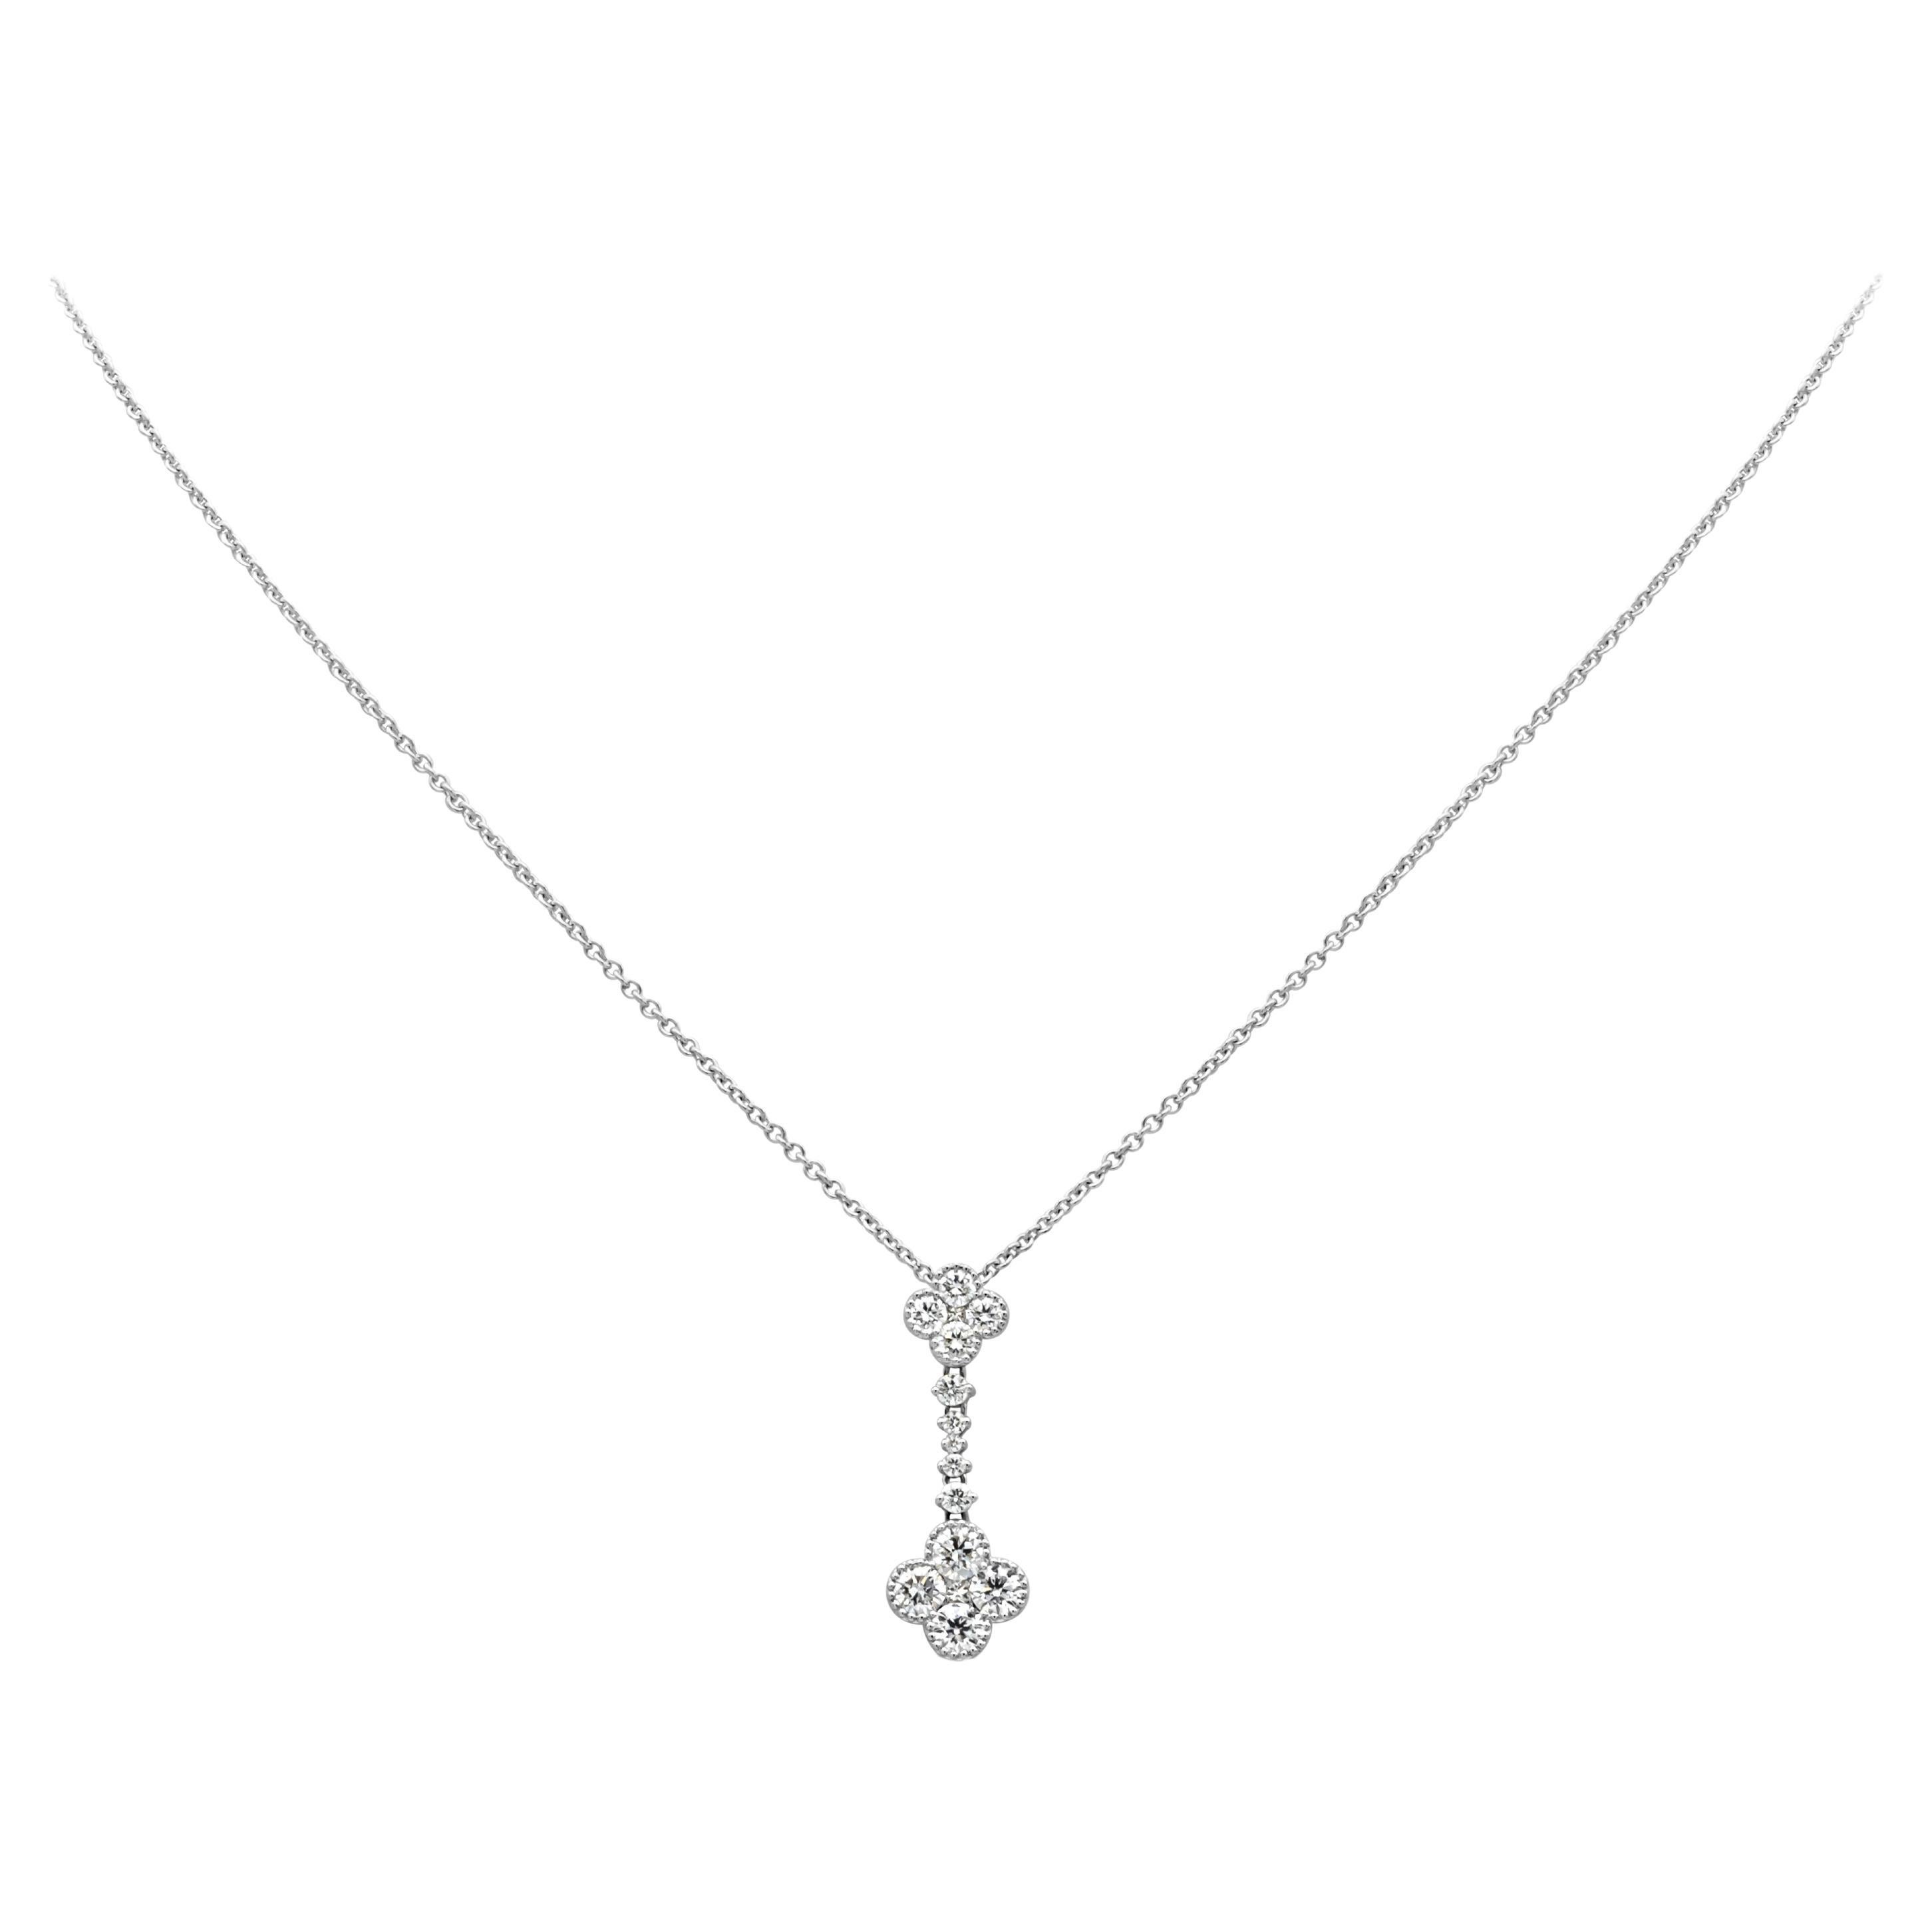 This stylish and unique drop pendant necklace showcases 15 round diamonds set in a beautiful drop floral-motif design weighing 0.98 carats total, G color and VS-SI1 in clarity. Suspended on an adjustable 14k white gold chain and finely made in 18k